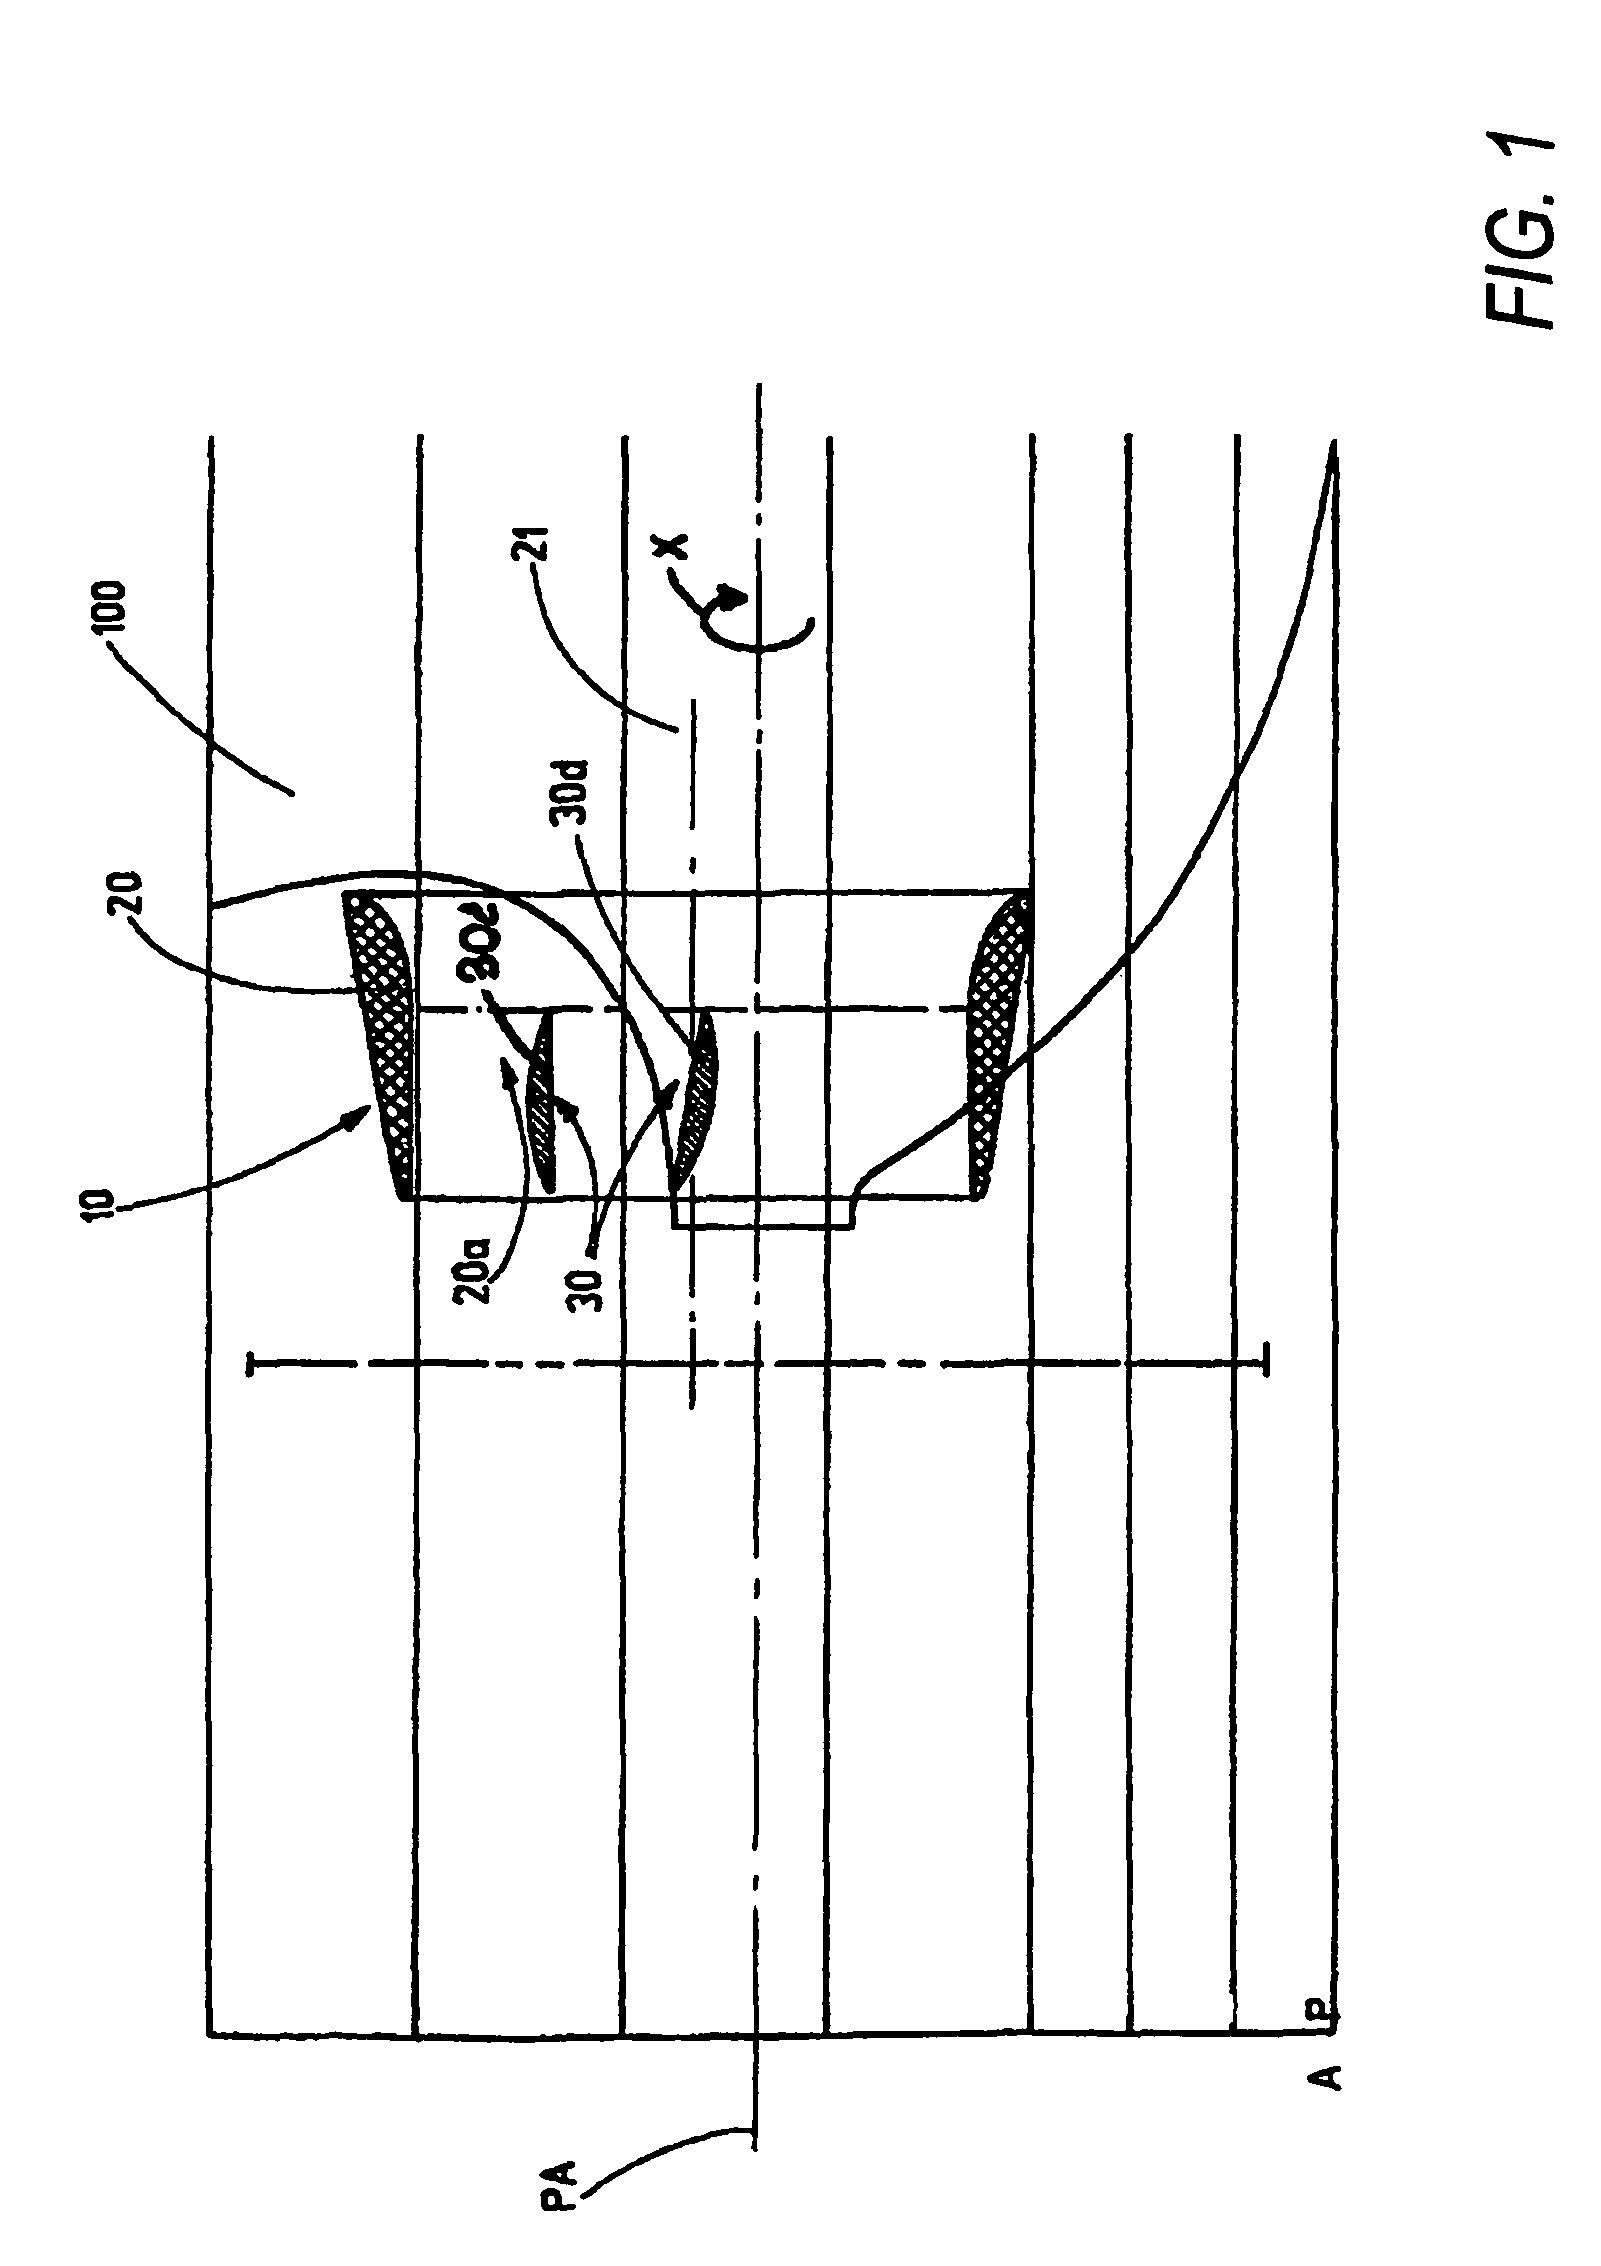 Device for reducing the power demand for the propulsion of a ship